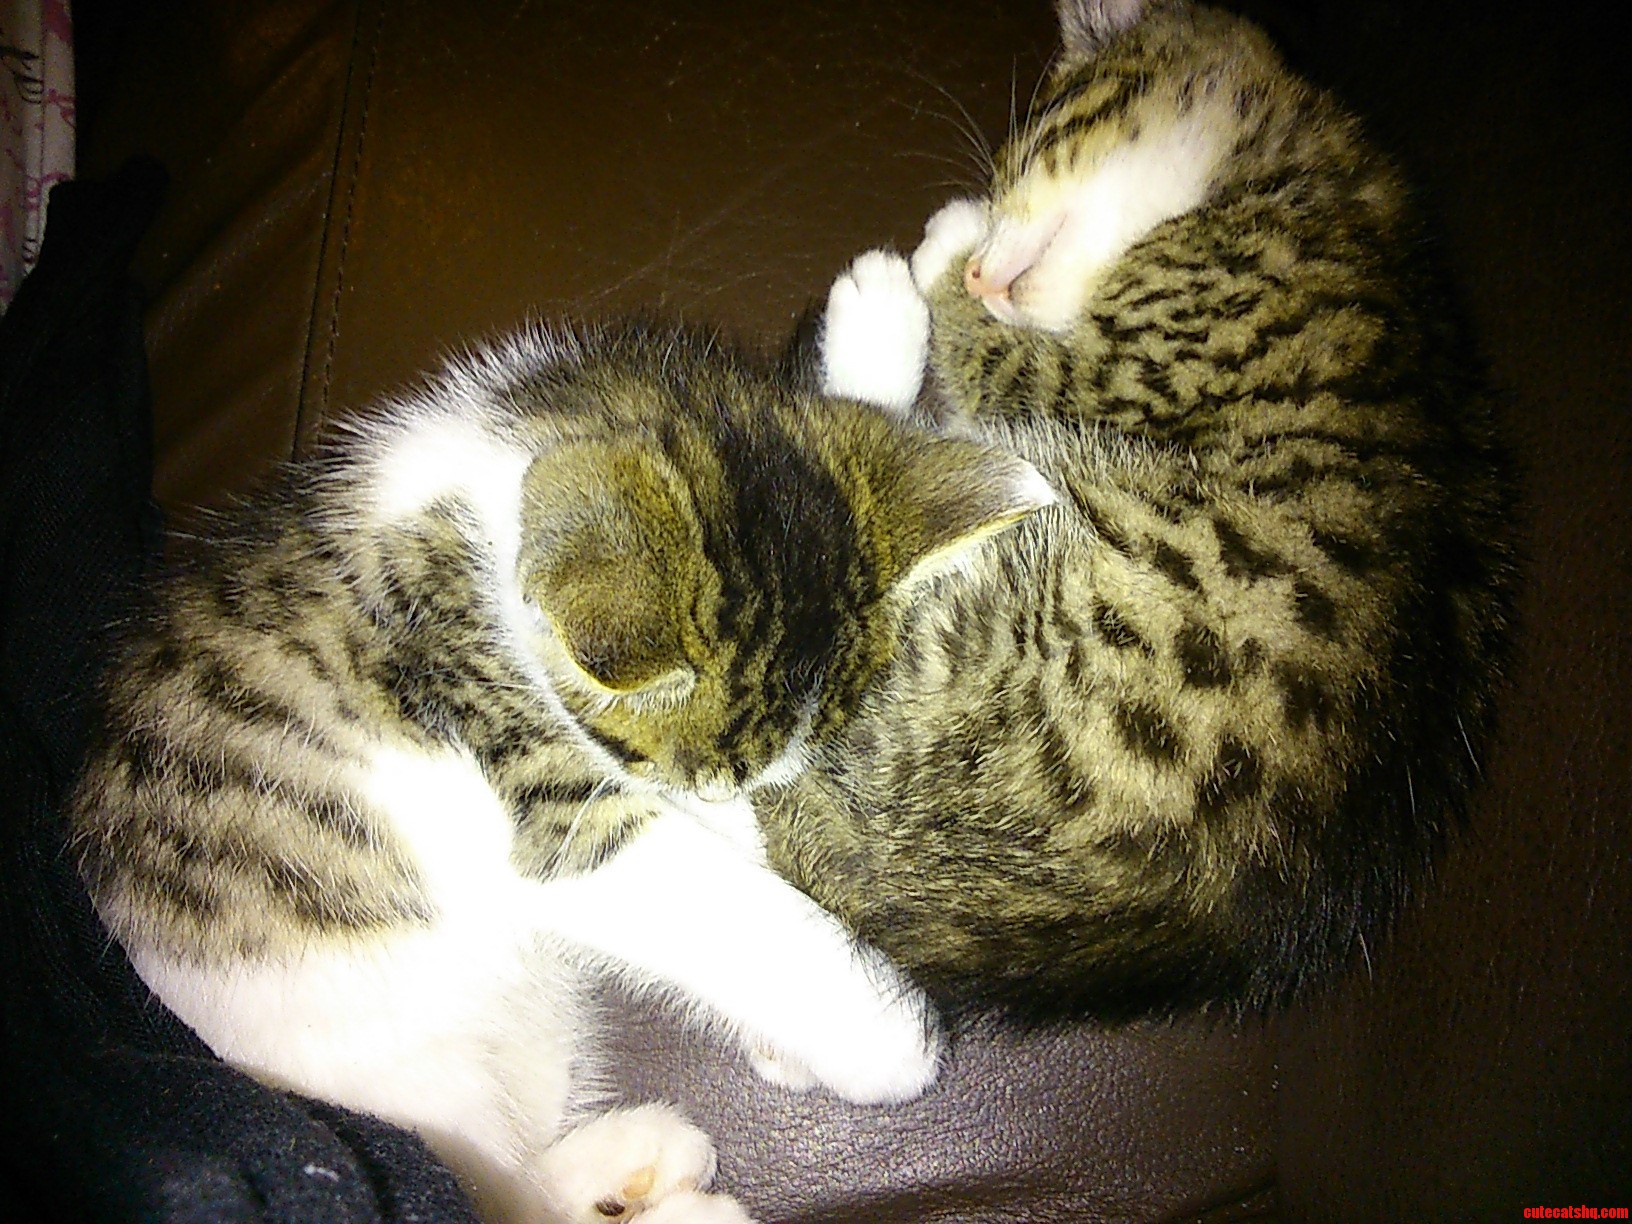 Got These Two Little Bundles Of Fluffy Joy A Couple Of Days Ago. Meet Charlie And Maurice.